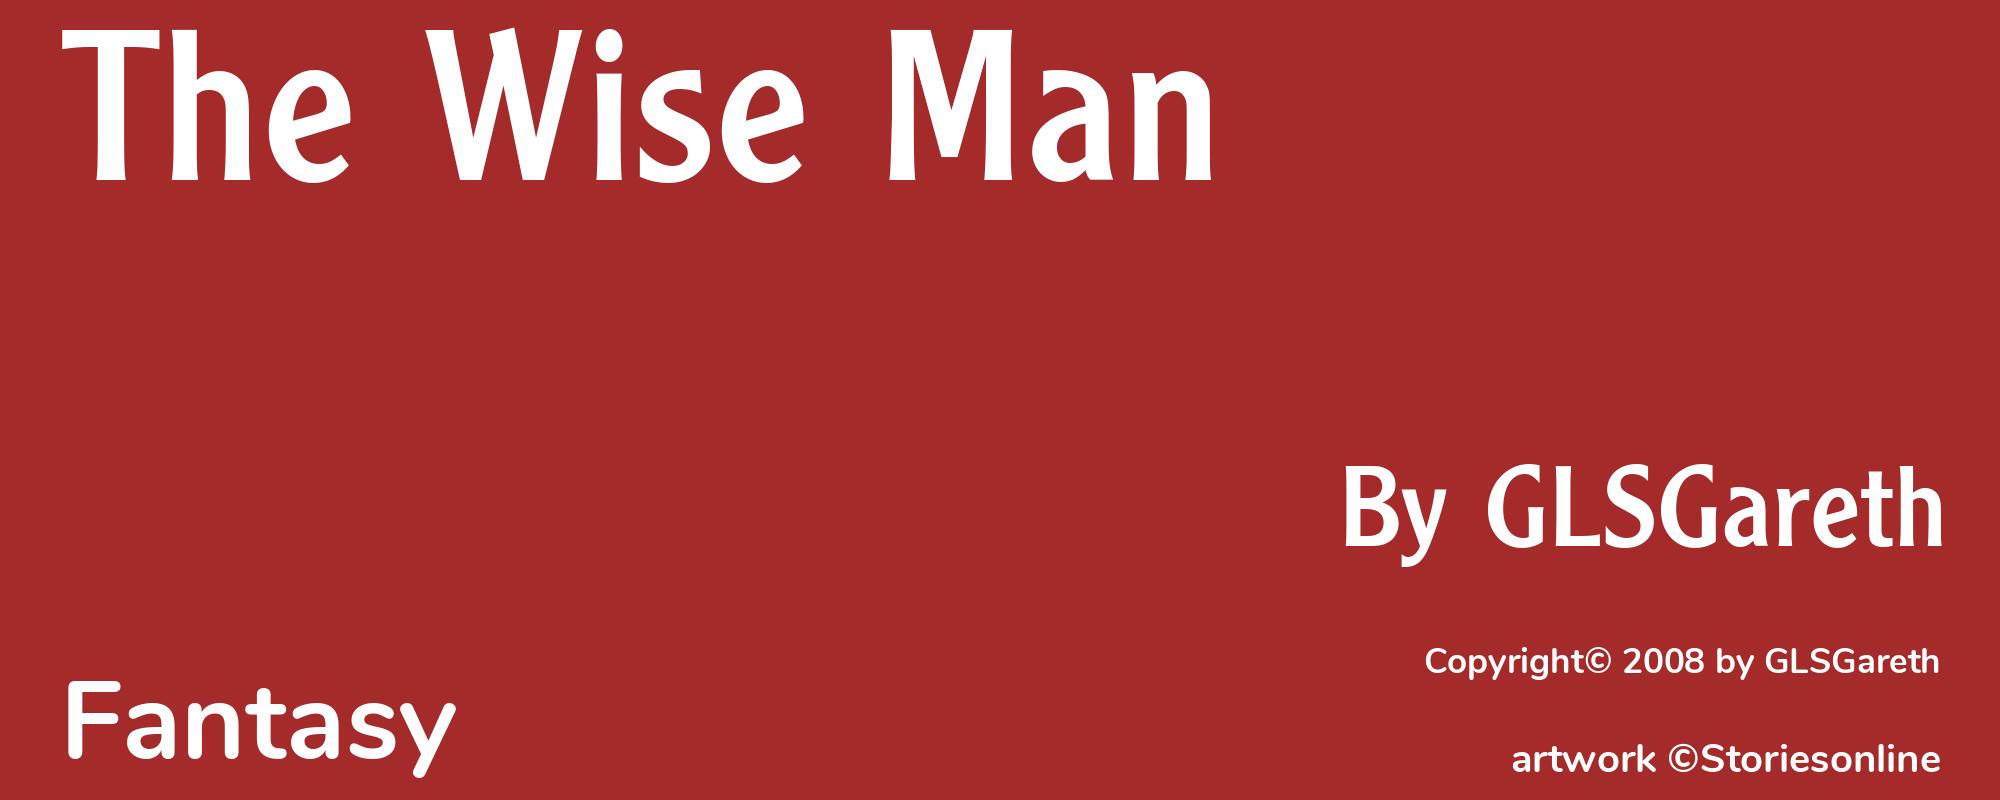 The Wise Man - Cover